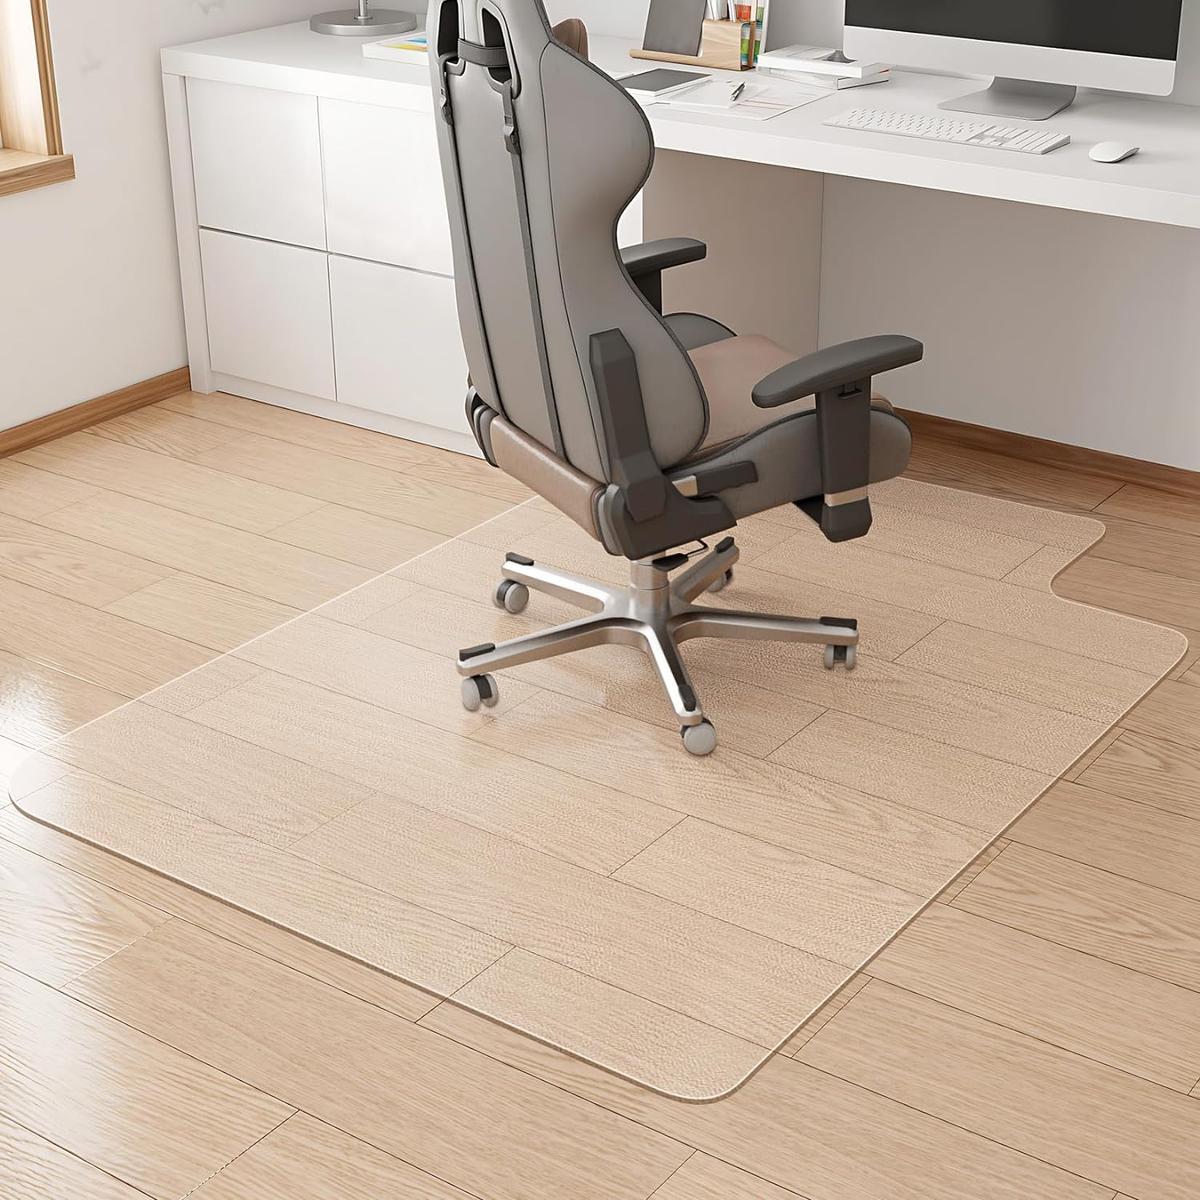 KMAT Office Chair Mat 36"x48" with Lip.  Retail $35.00